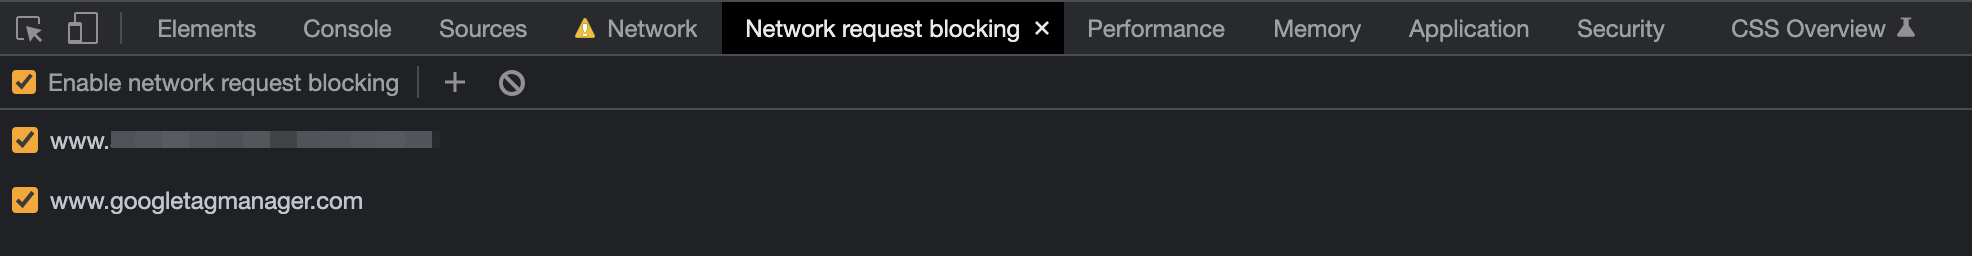 Network request blocking tab in Development panel, Brave browser